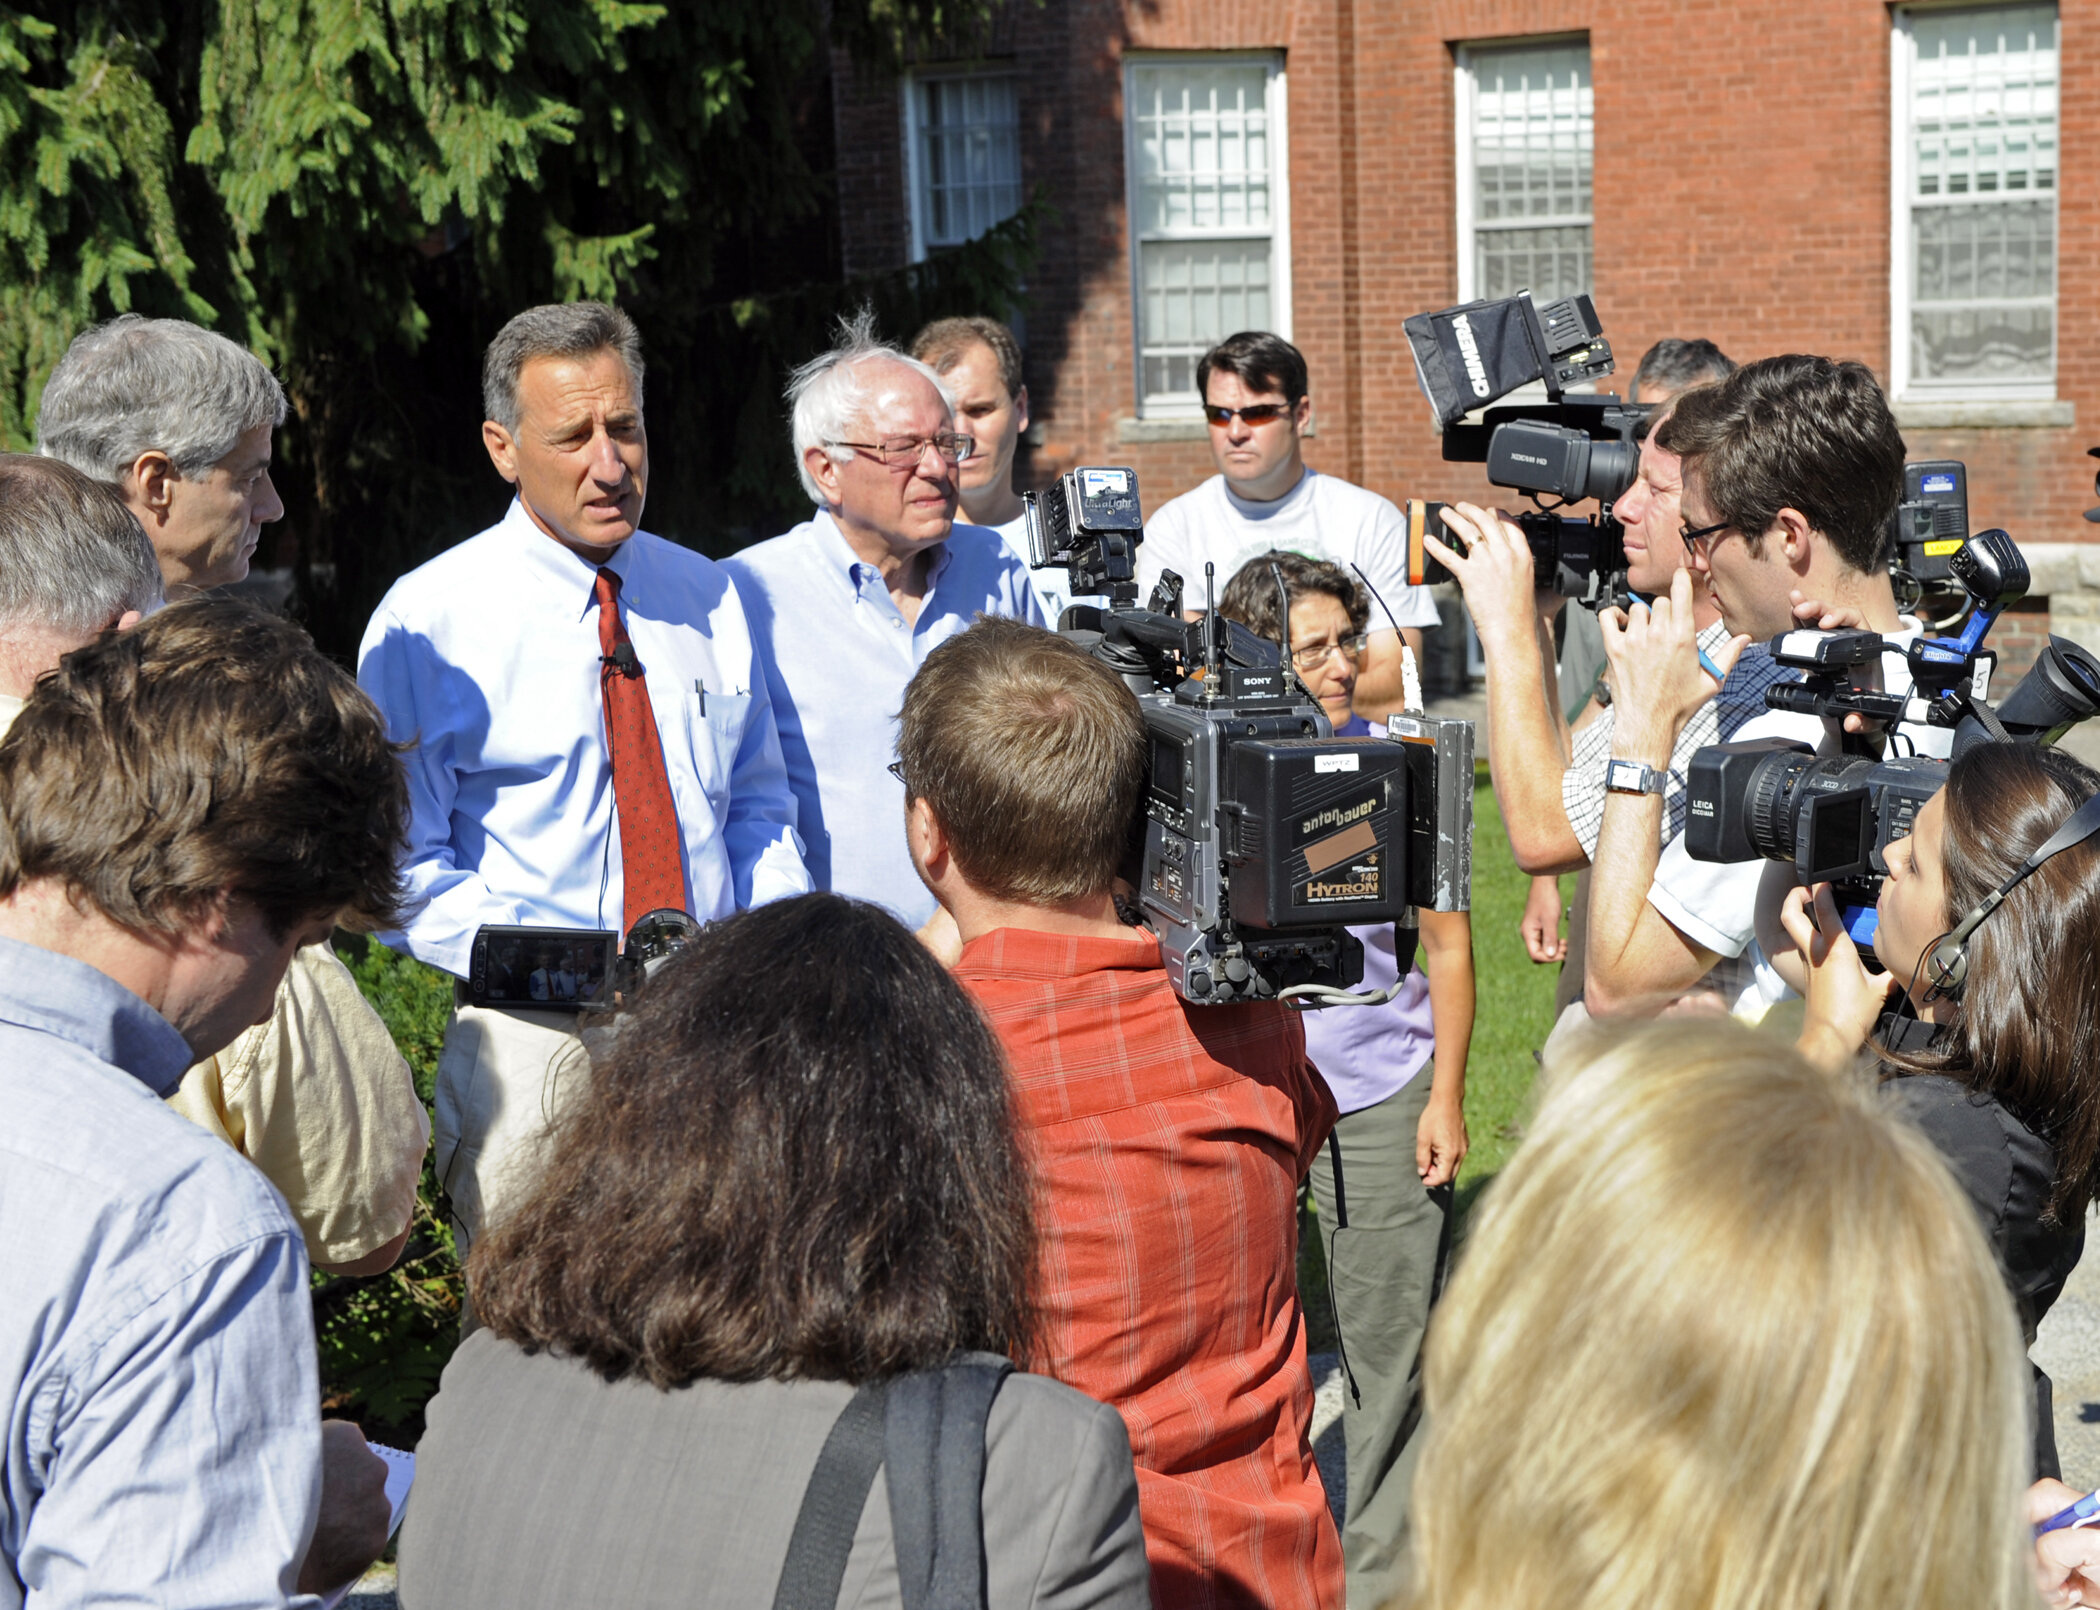  Meeting reporters outside the State Office Complex which was closed, its 1,000+-member workforce displaced by Irene. Photo by Gordon Miller 